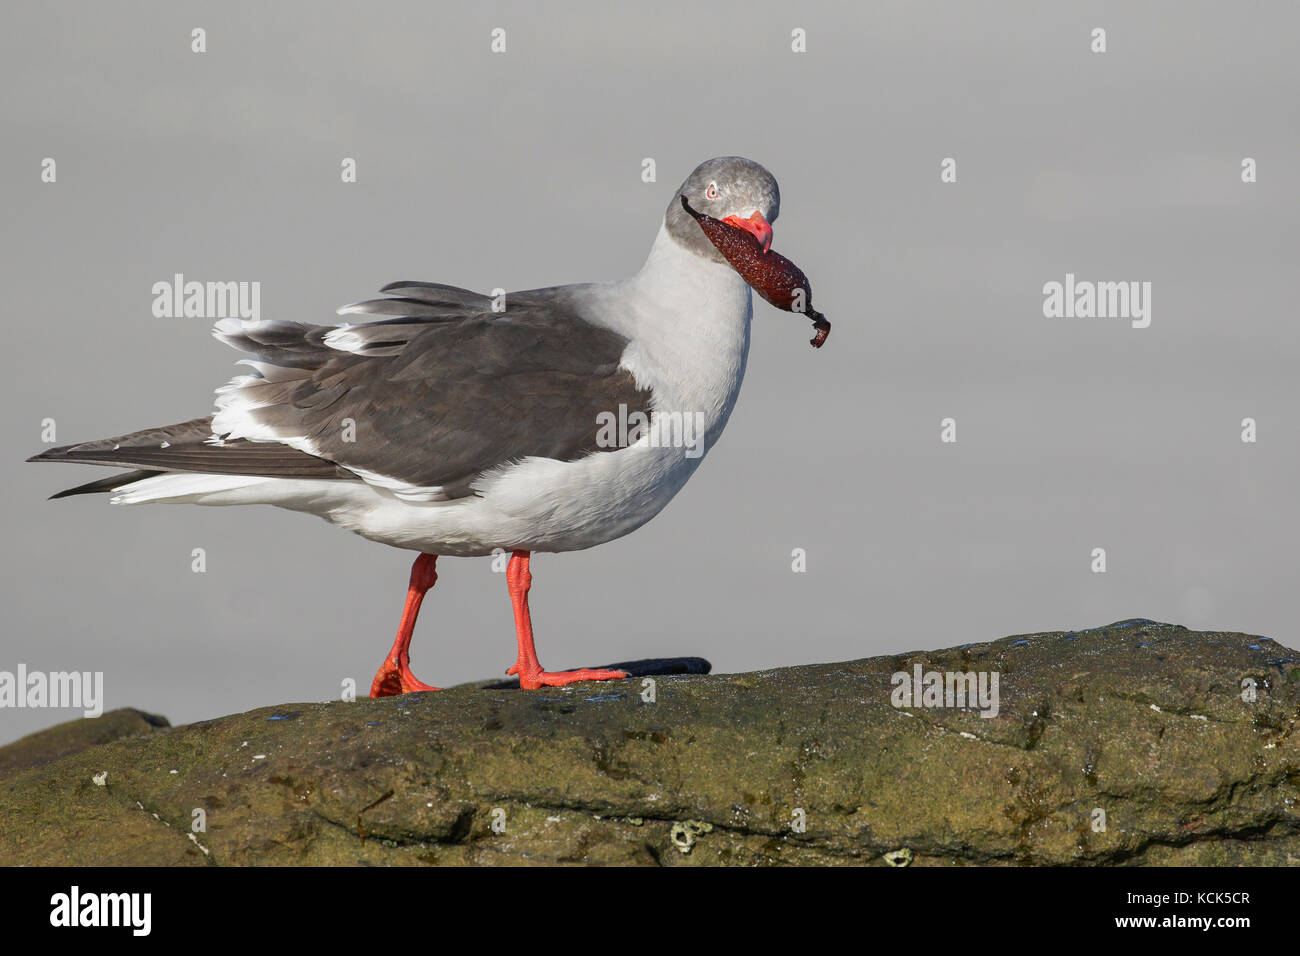 Dolphin Gull, Leucophaeus scoresbii perched on a rock in the Falkland Islands. Stock Photo